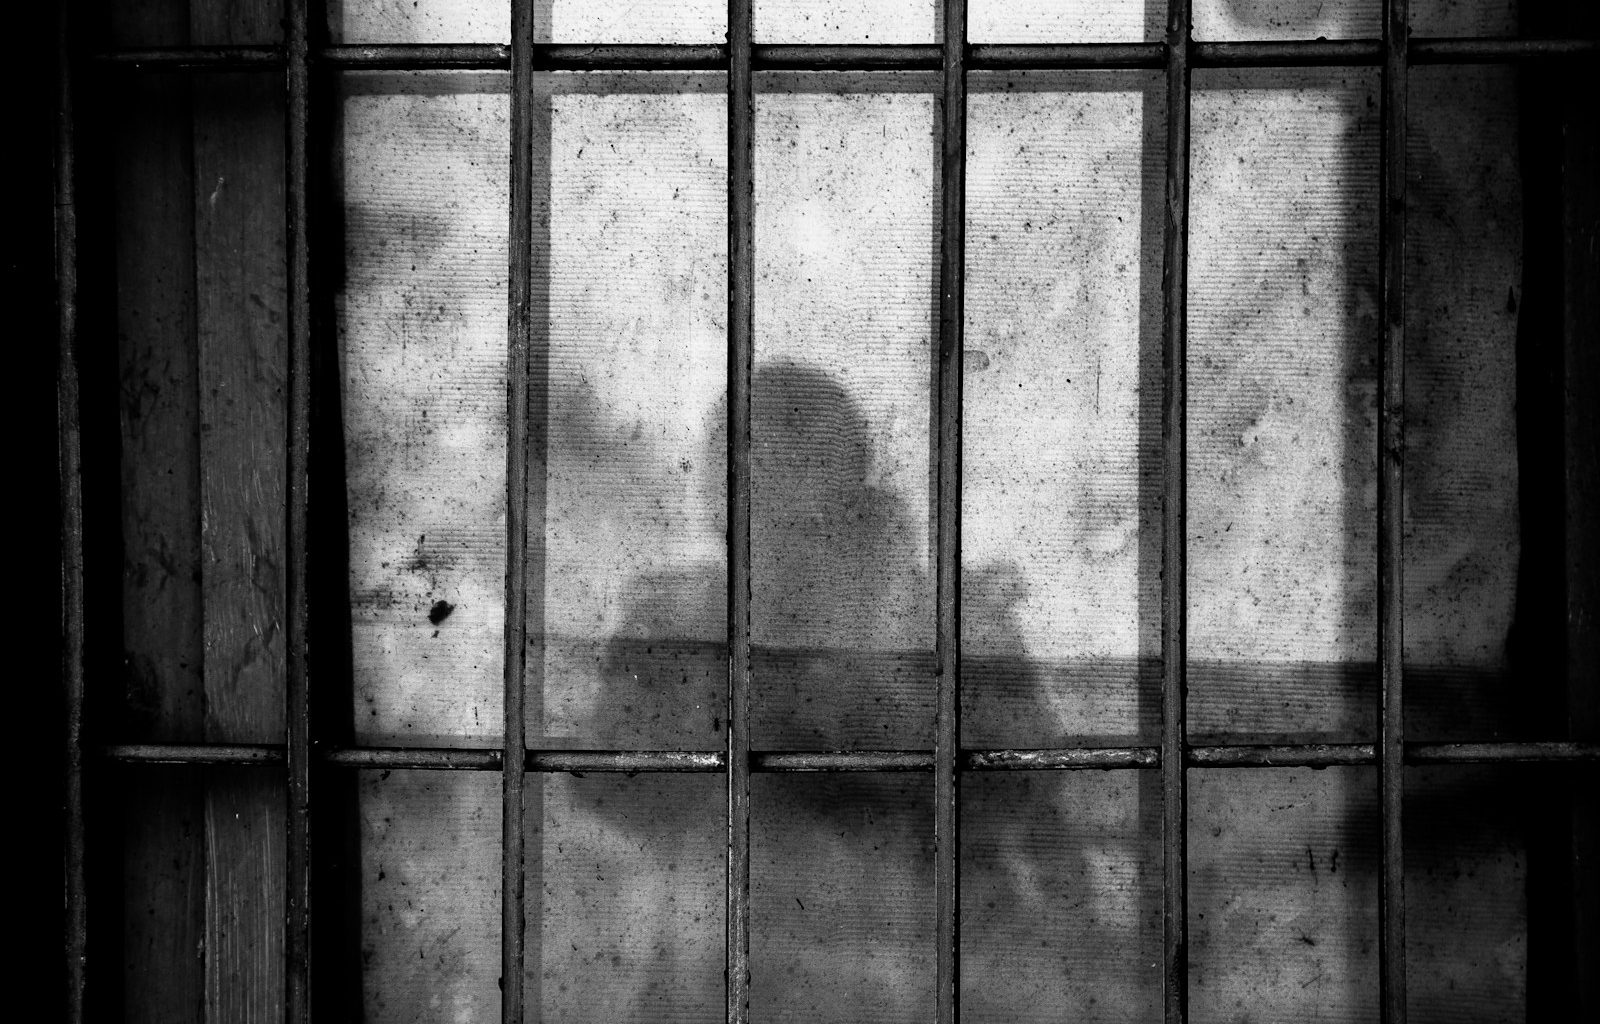 a shadow of a person behind bars in a jail cell